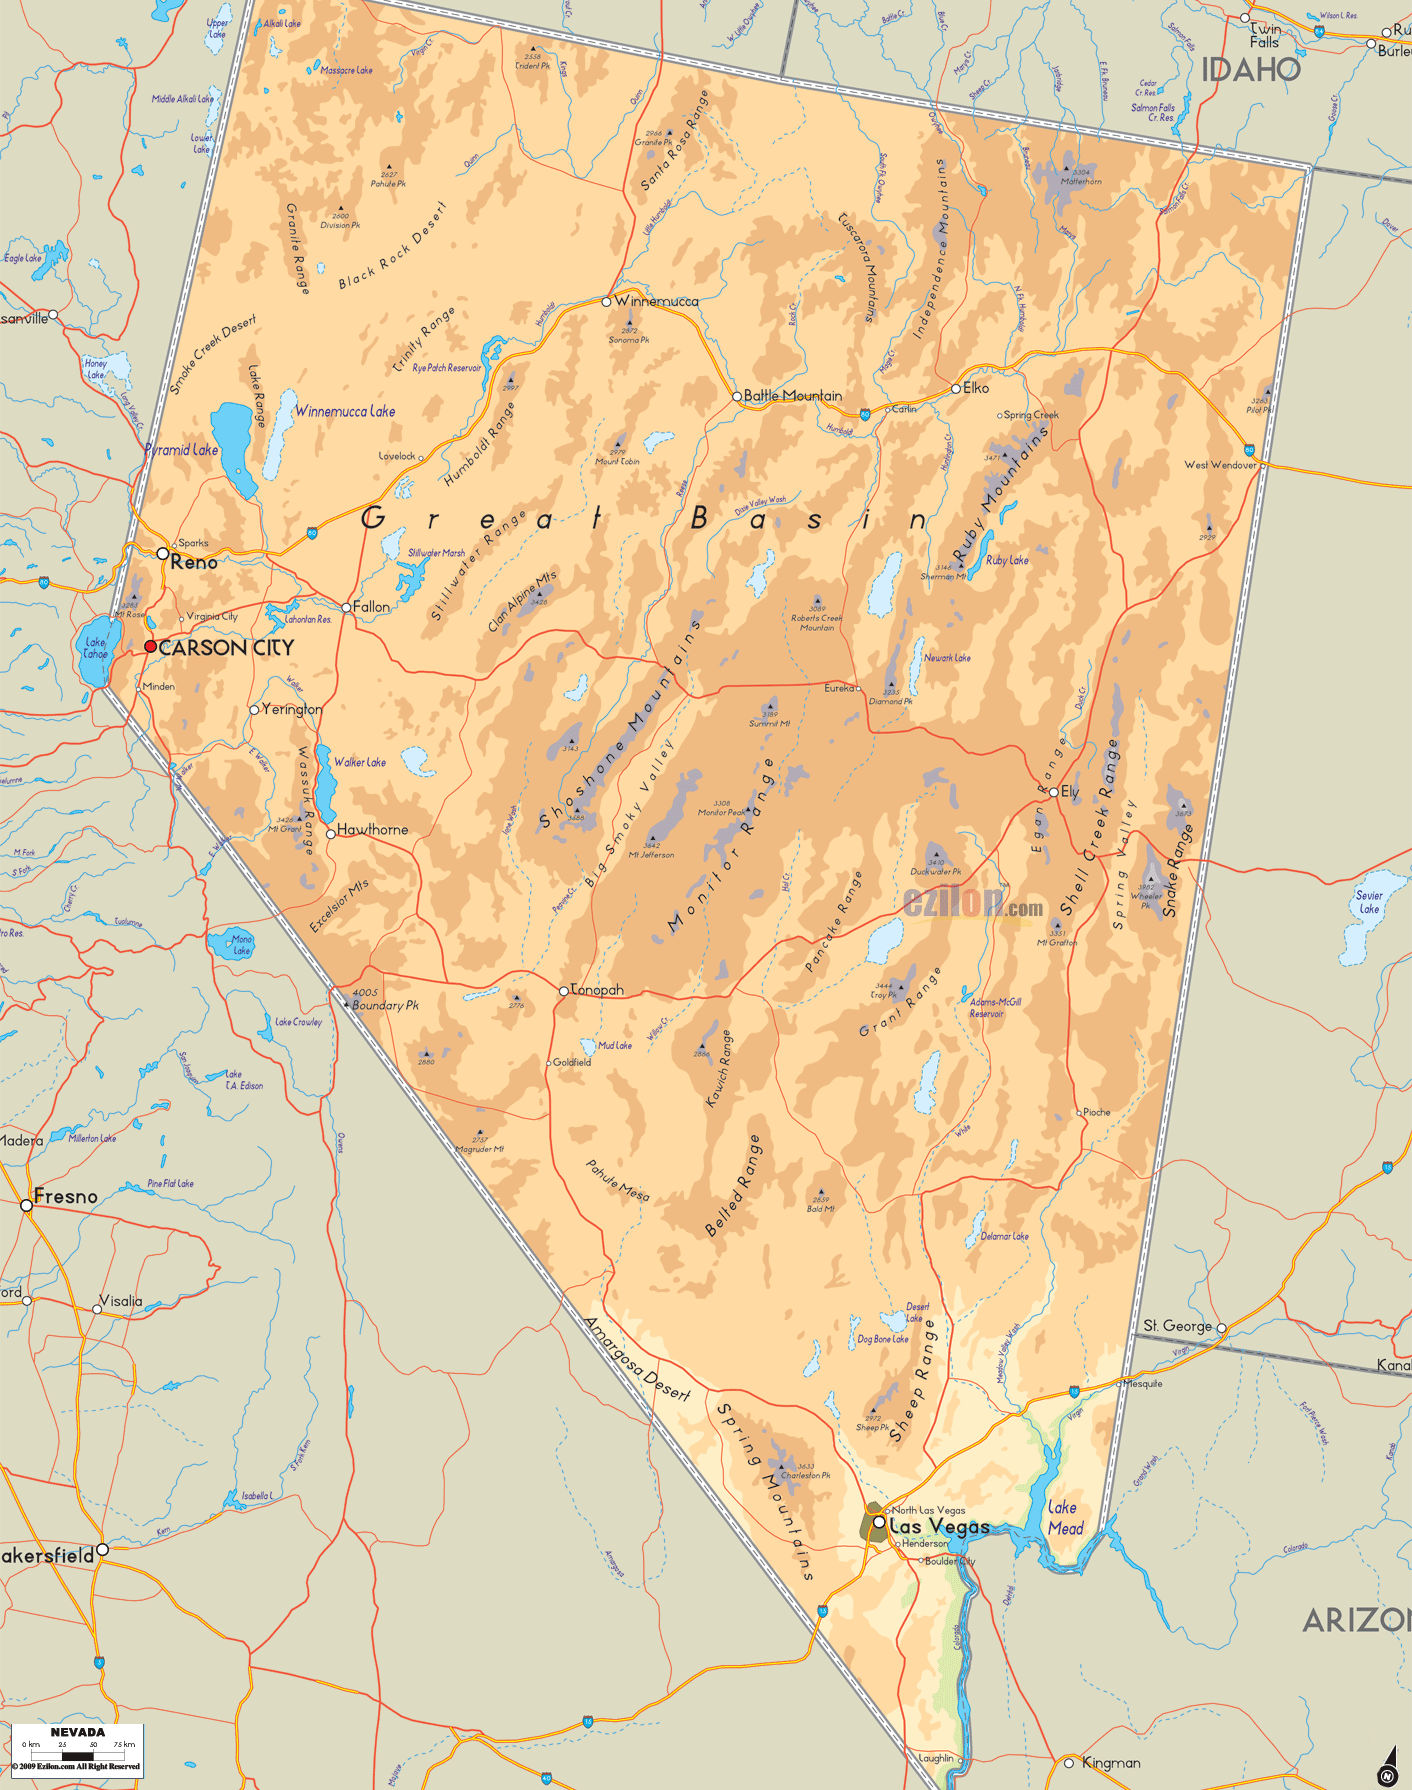 Physical map of Nevada State, USA showing major geographical features such as rivers, lakes, topography and land formations.